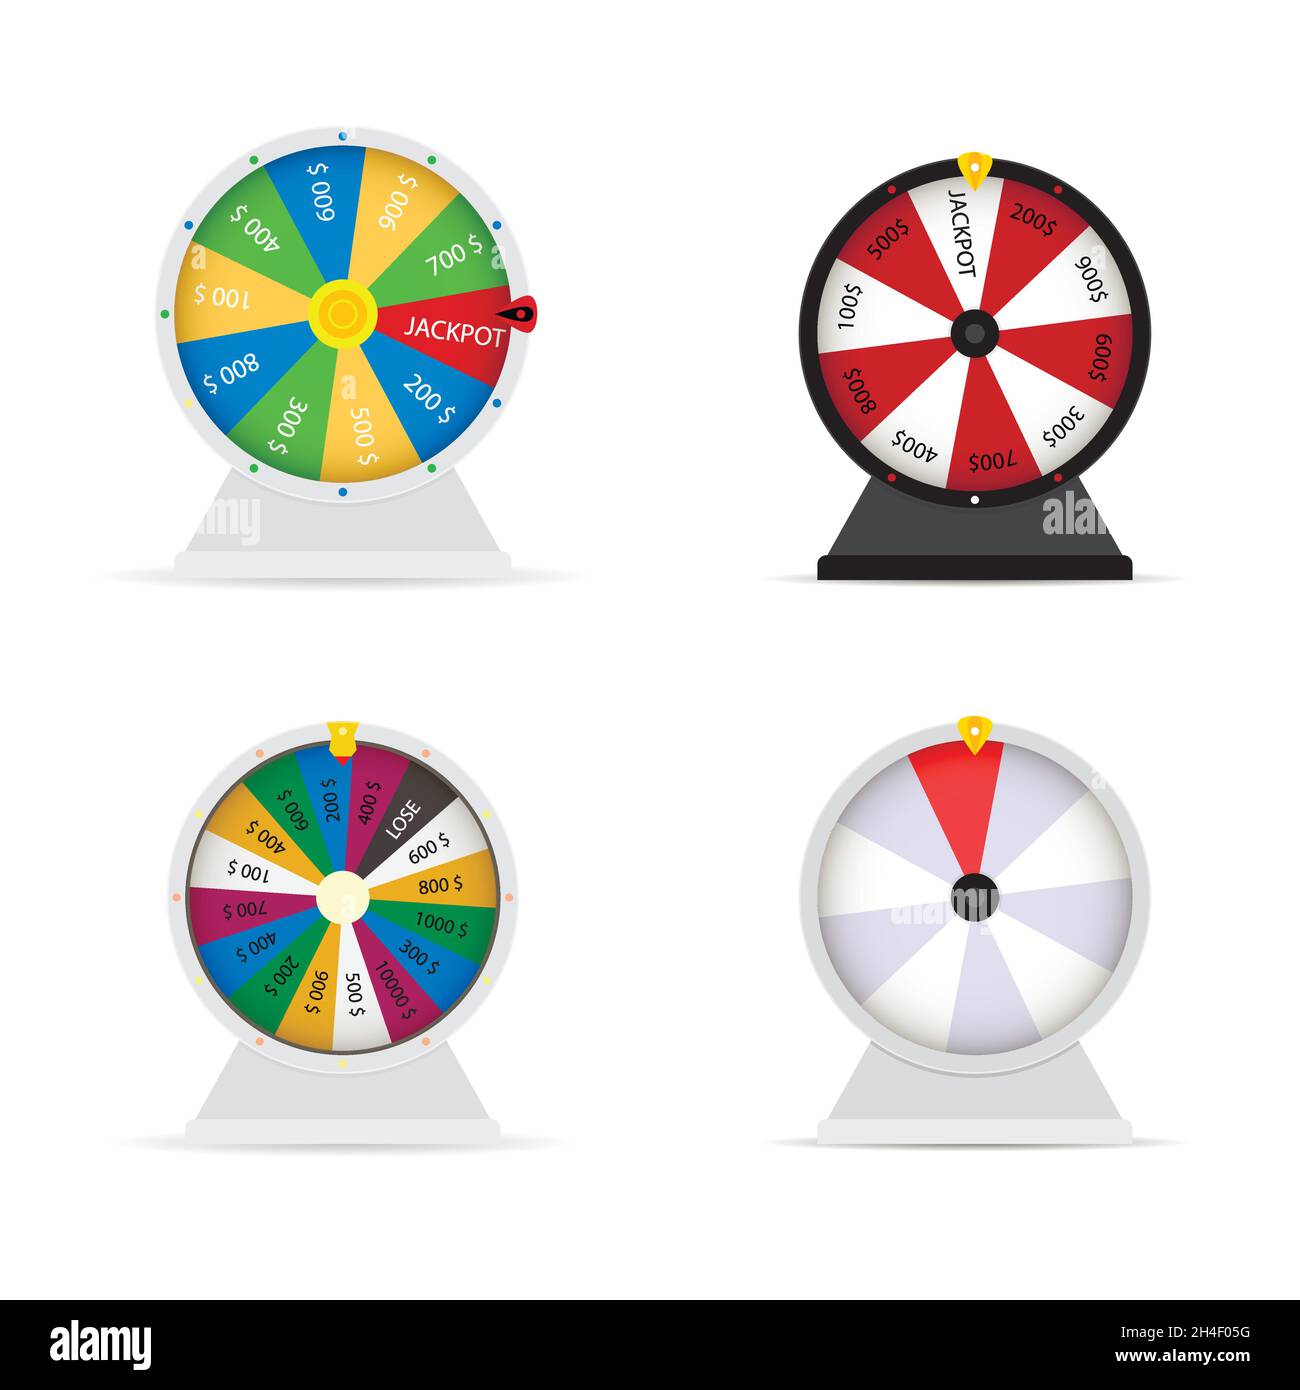 Spinning wheel or game wheel. Turning wheel of luck or lucky money chance  symbol vector illustration Stock Vector